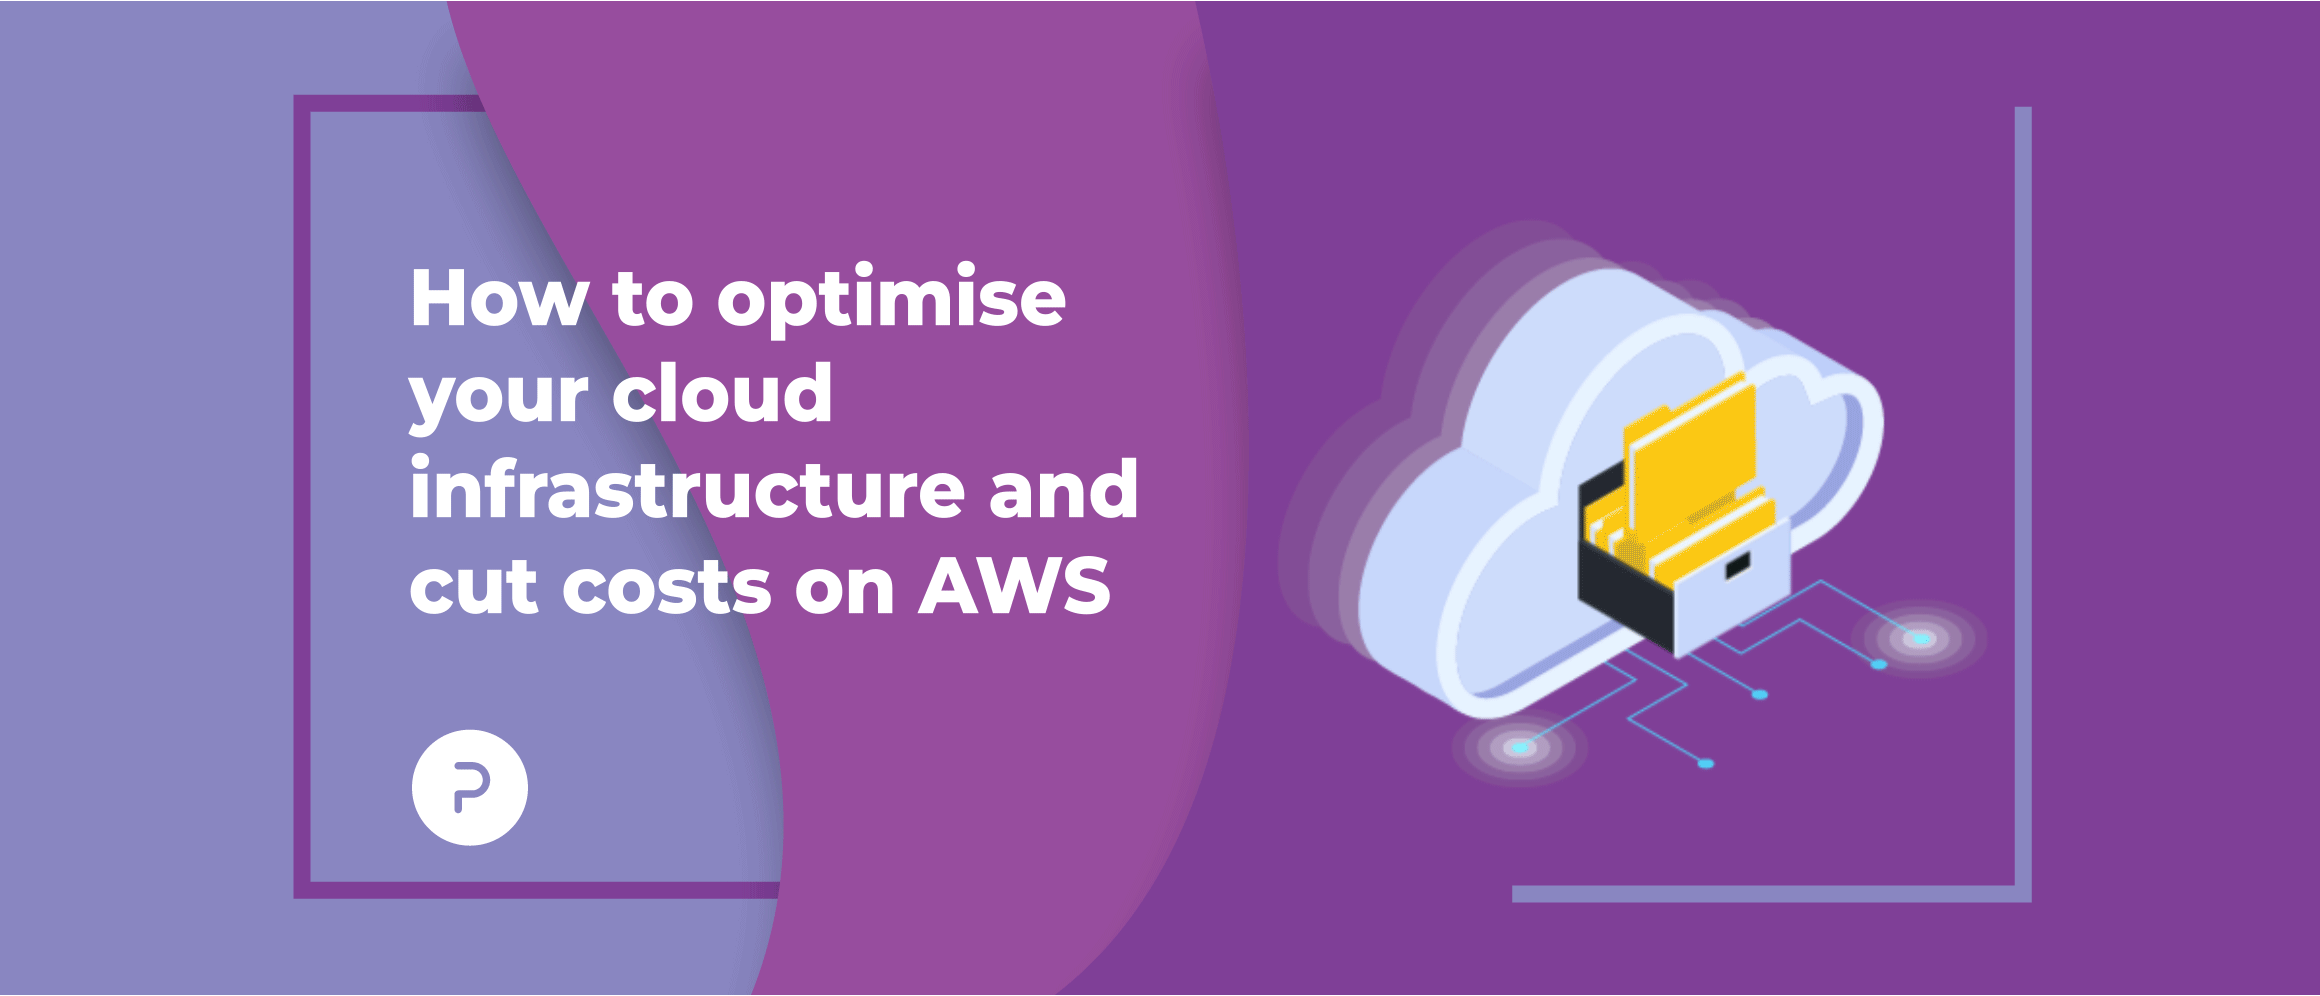 How to optimise your cloud infrastructure and cut costs on AWS